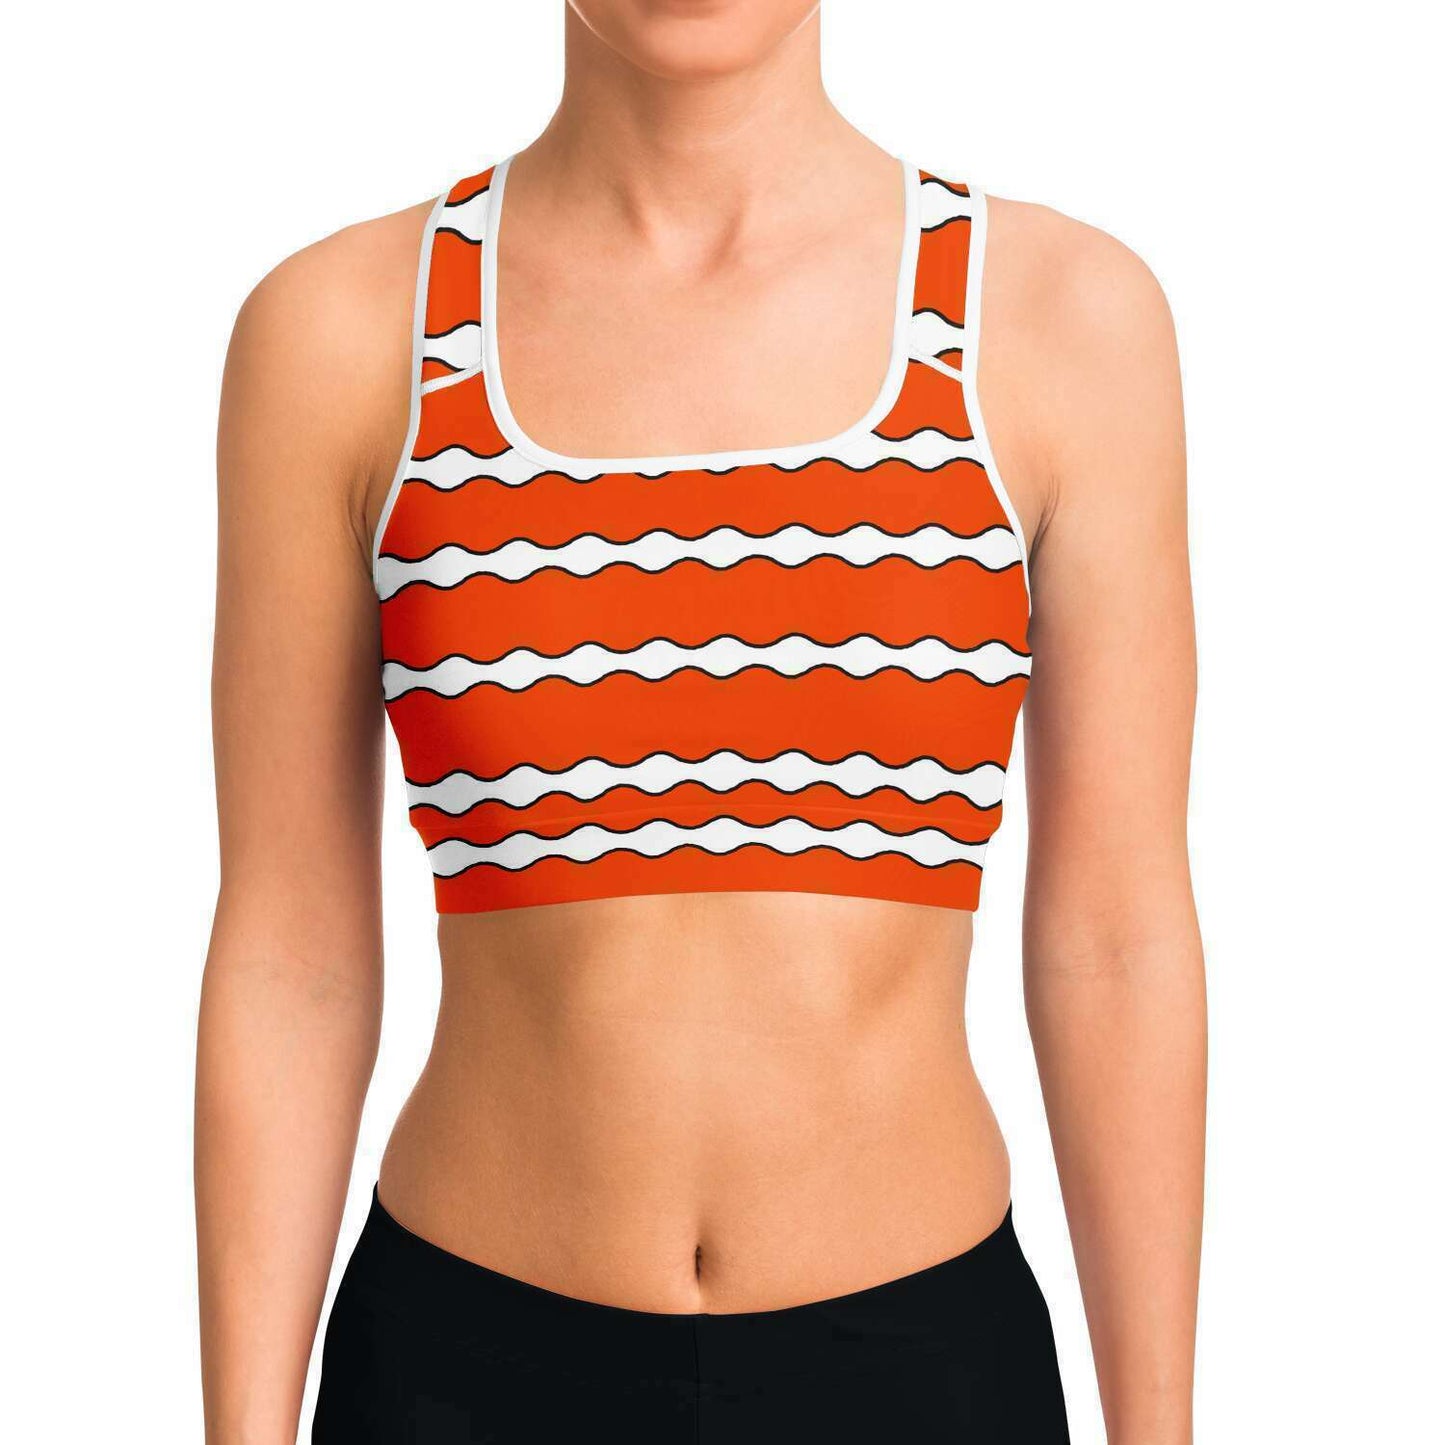 Front view of model wearing clownfish racer-back crop top / sports bra for scuba diving, yoga and mid-level intensity sports